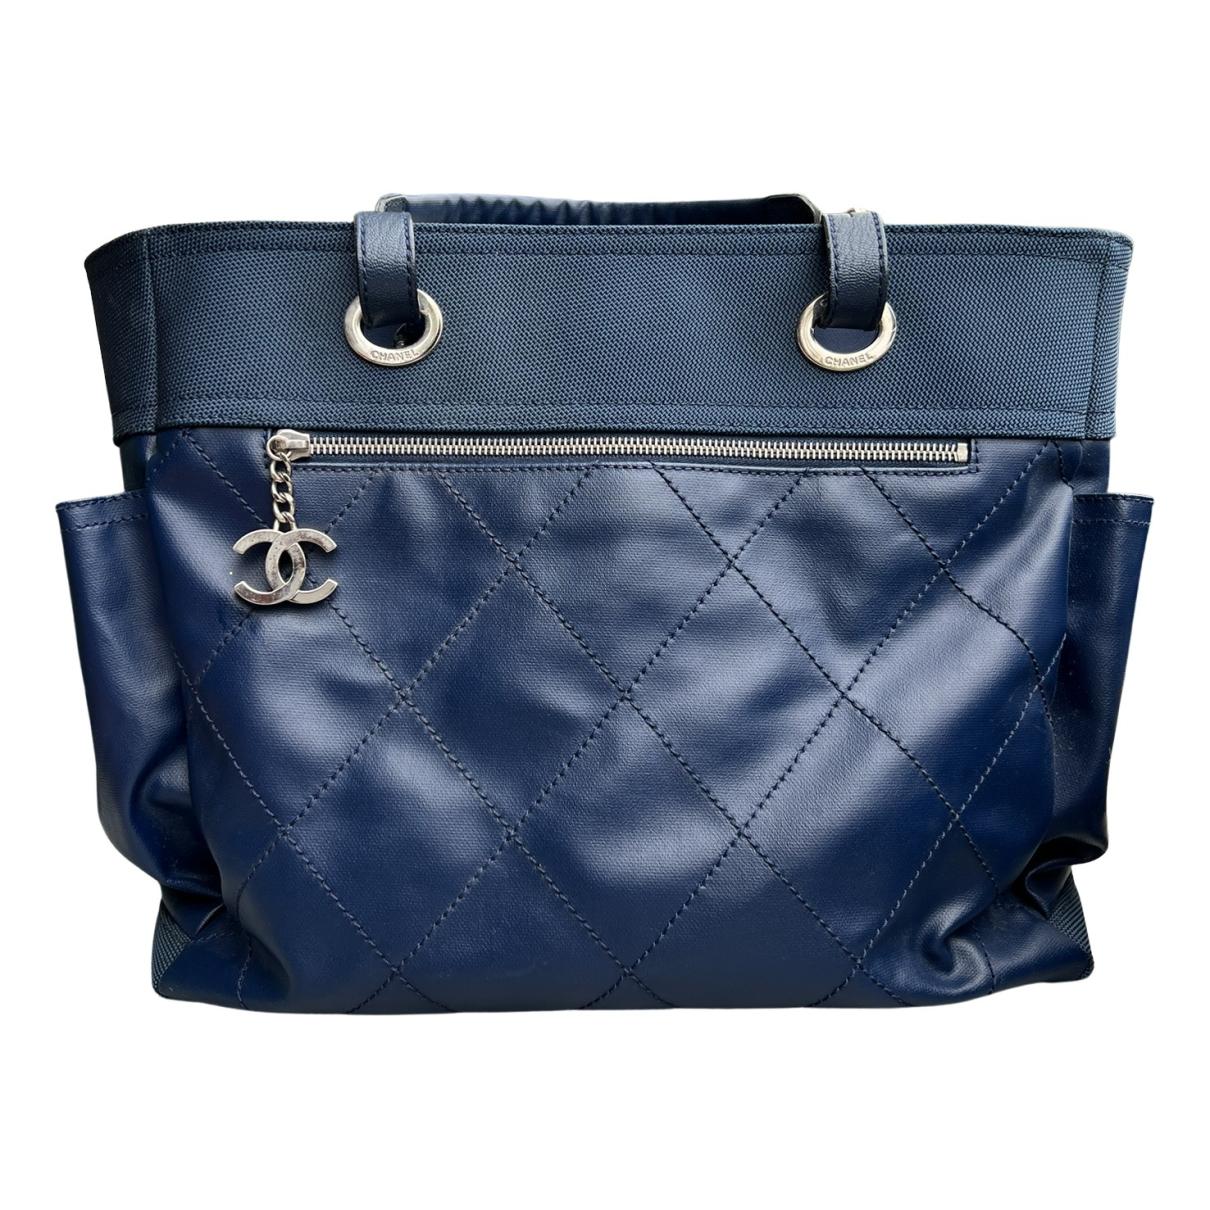 Paris-biarritz leather tote Chanel Navy in Leather - 29354728